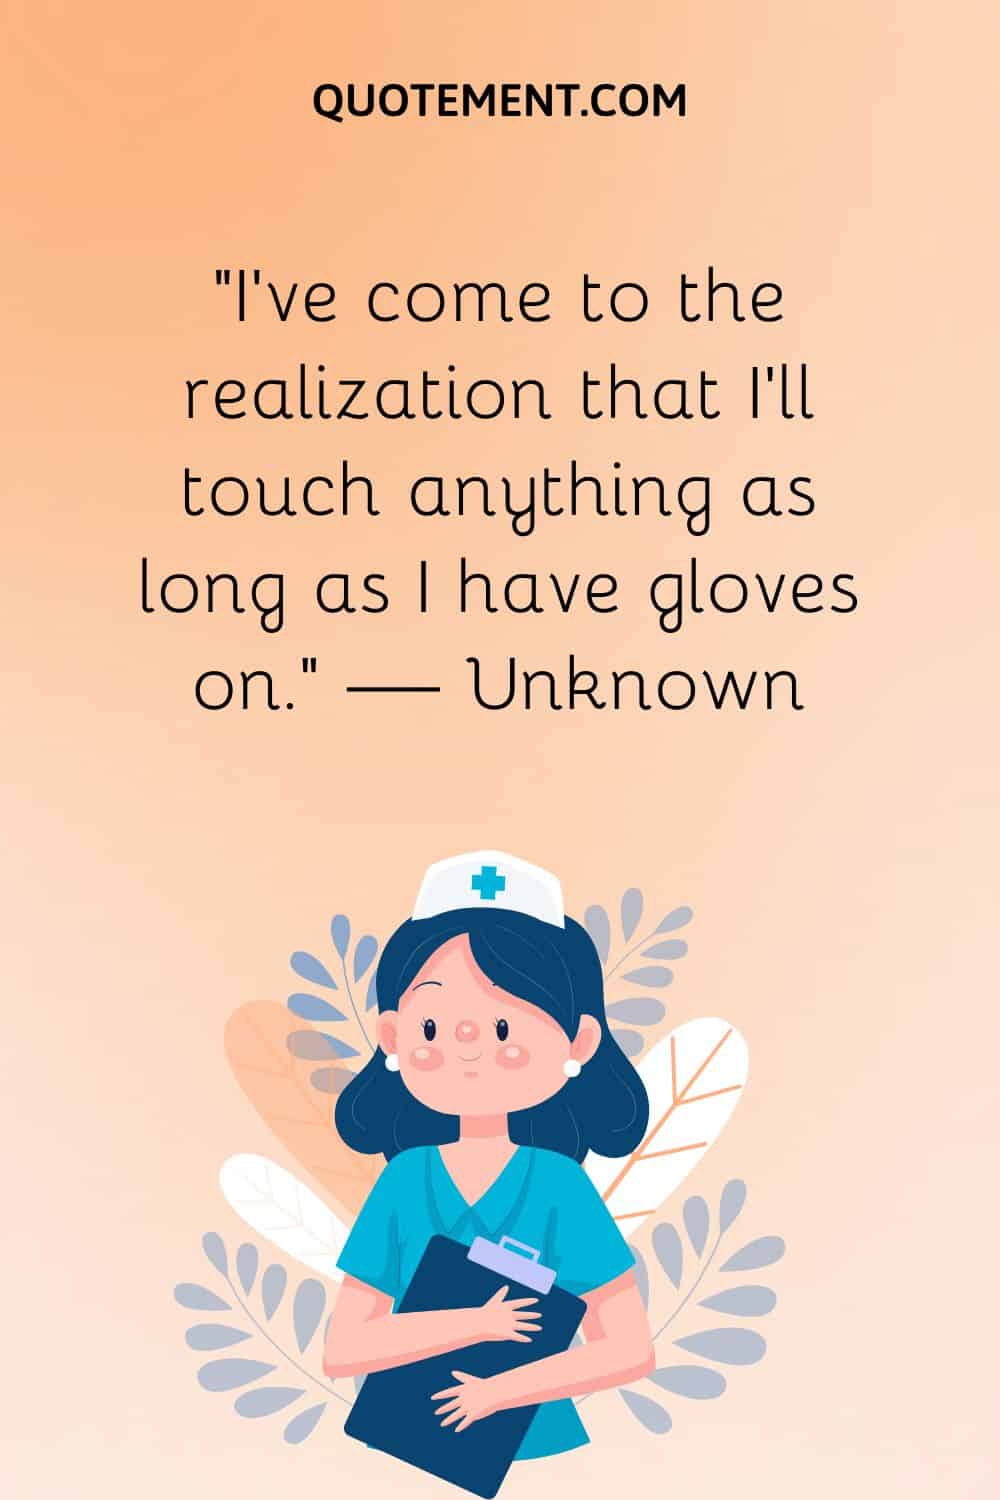 “I’ve come to the realization that I’ll touch anything as long as I have gloves on.” — Unknown